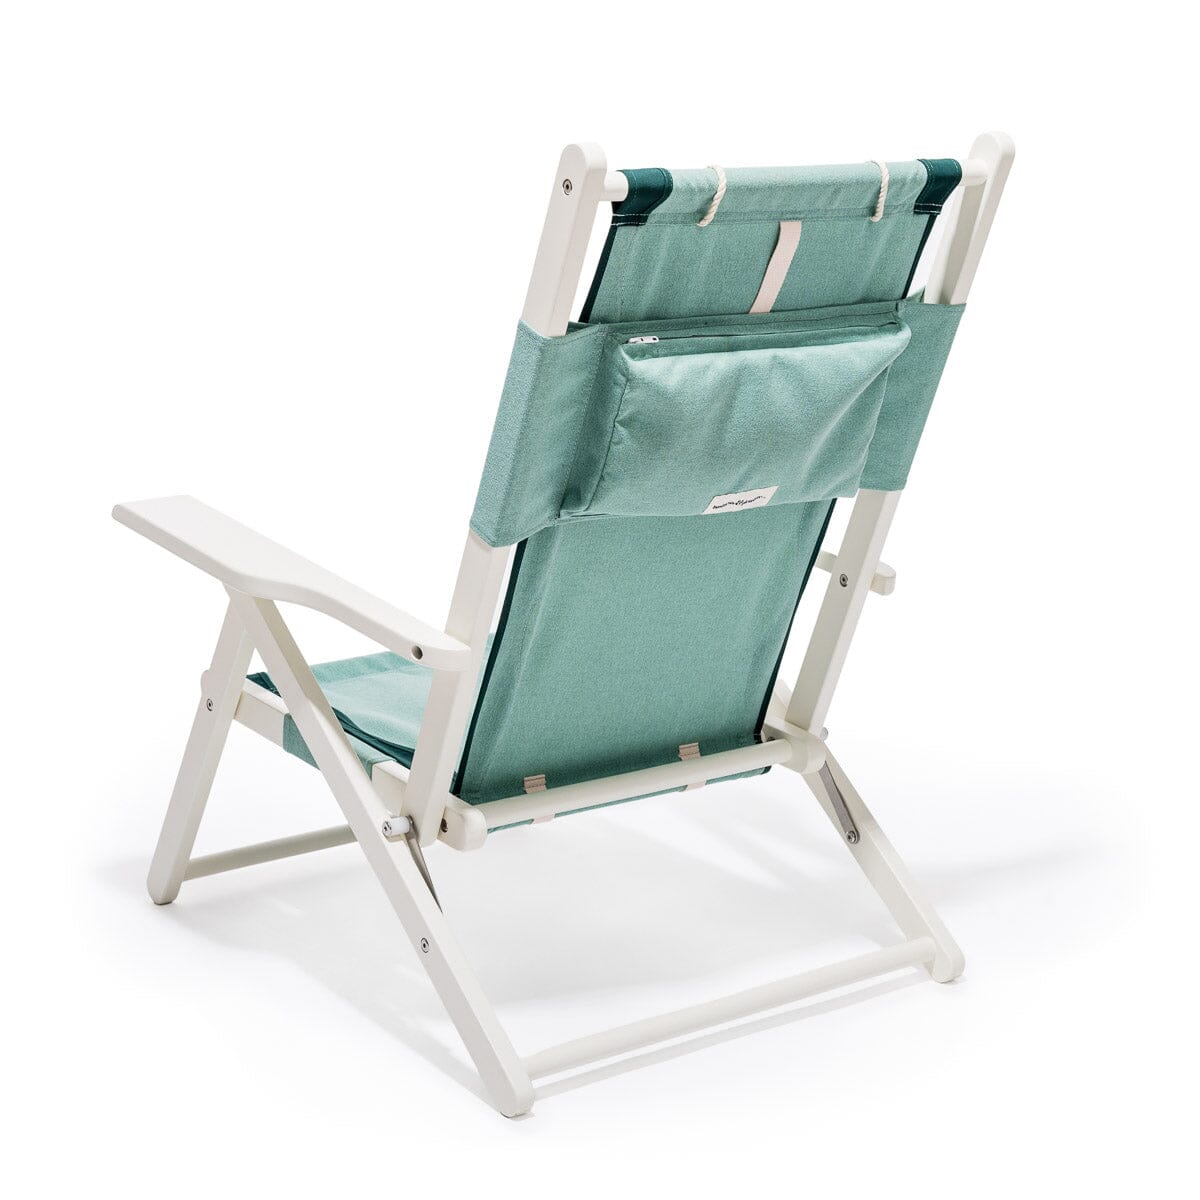 The Tommy Chair - Rivie Green Tommy Chair Business & Pleasure Co Aus 